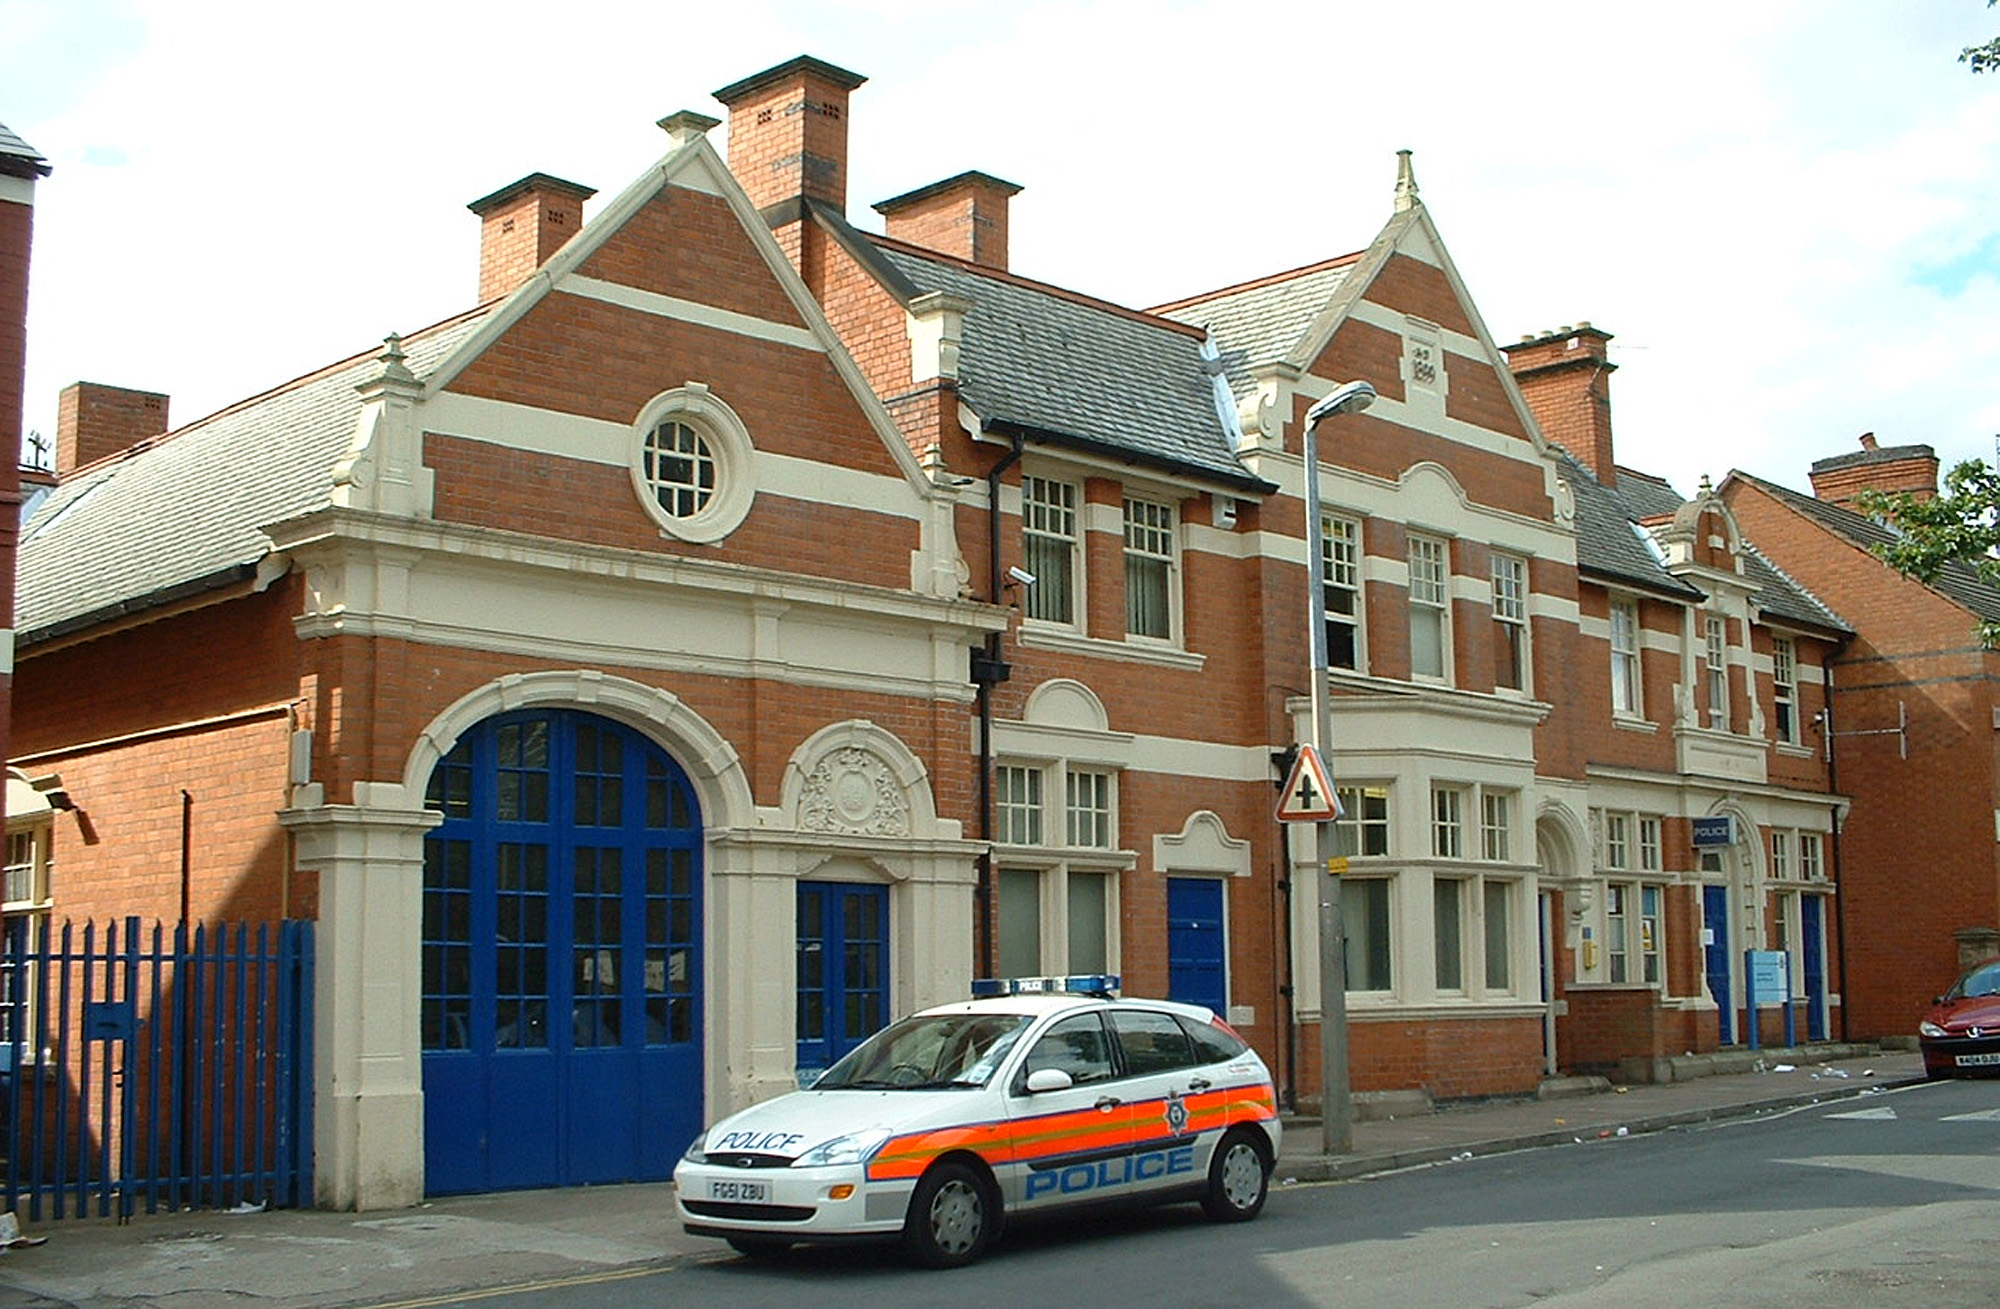 The police station c.2000 - Colin Hyde